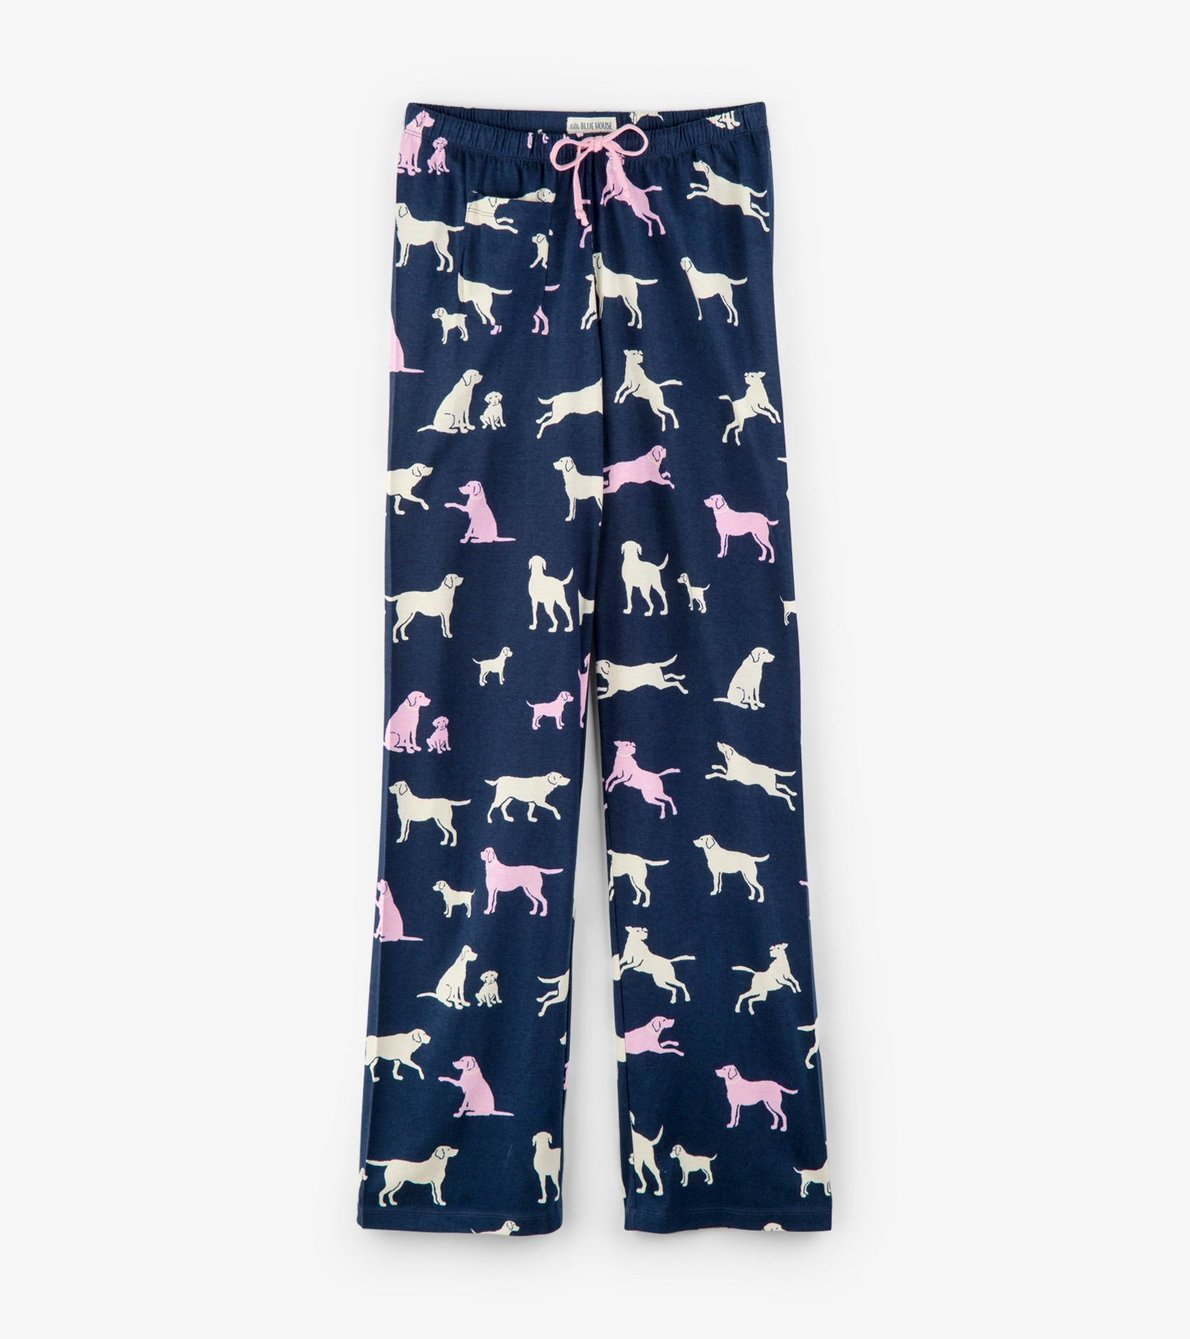 View larger image of Little Labs Women's Jersey Pajama Pants